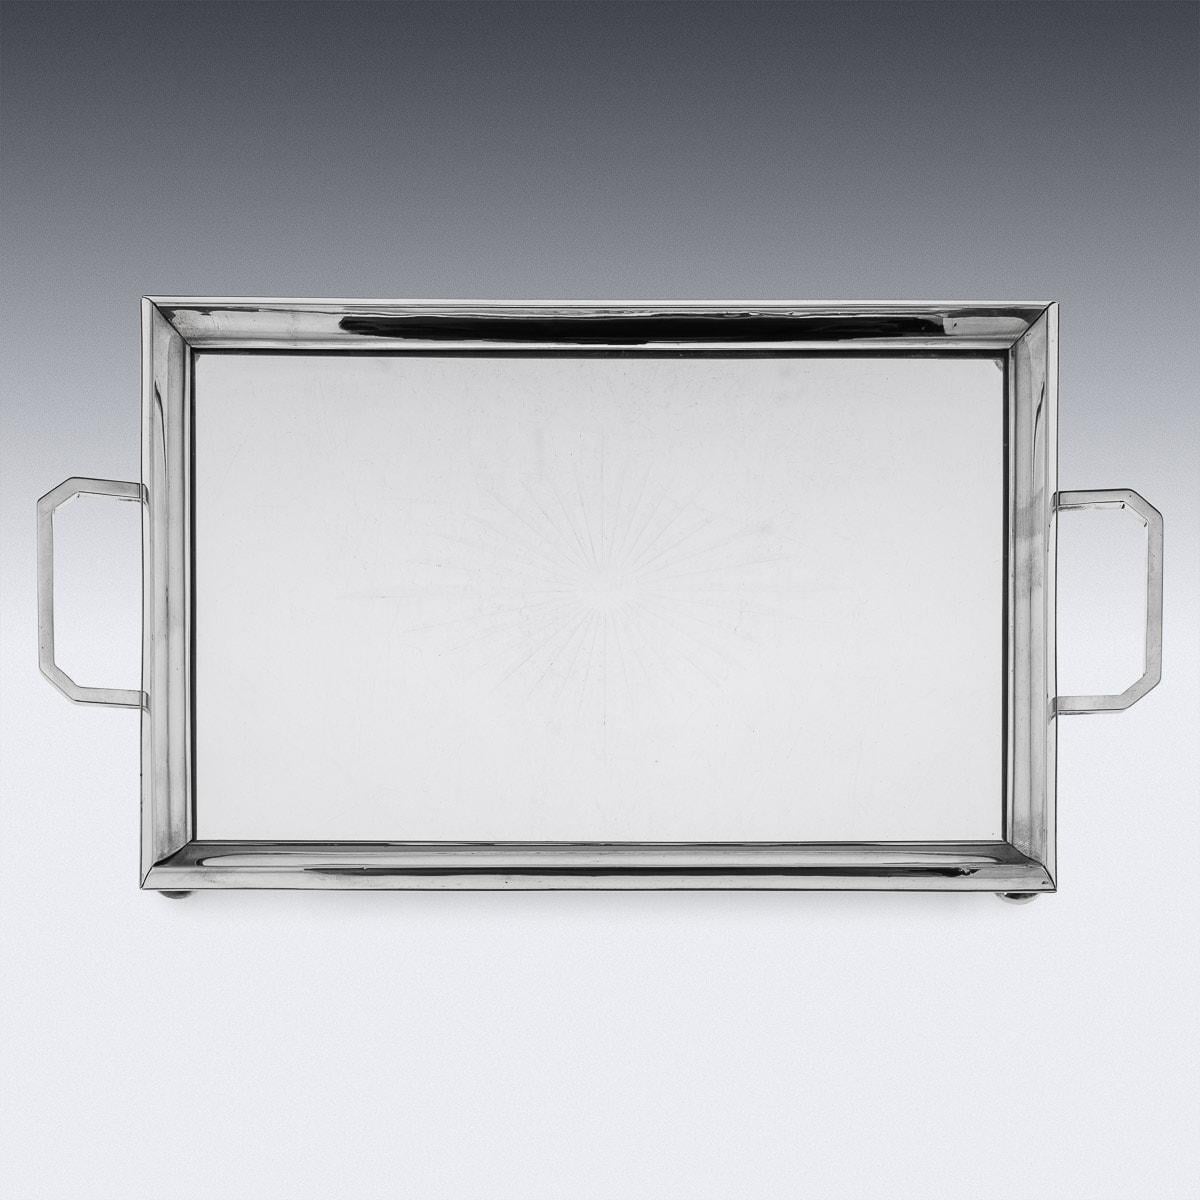 British 20th Century Art Deco Solid Silver & Cut Glass Cocktail Tray, c.1924 For Sale